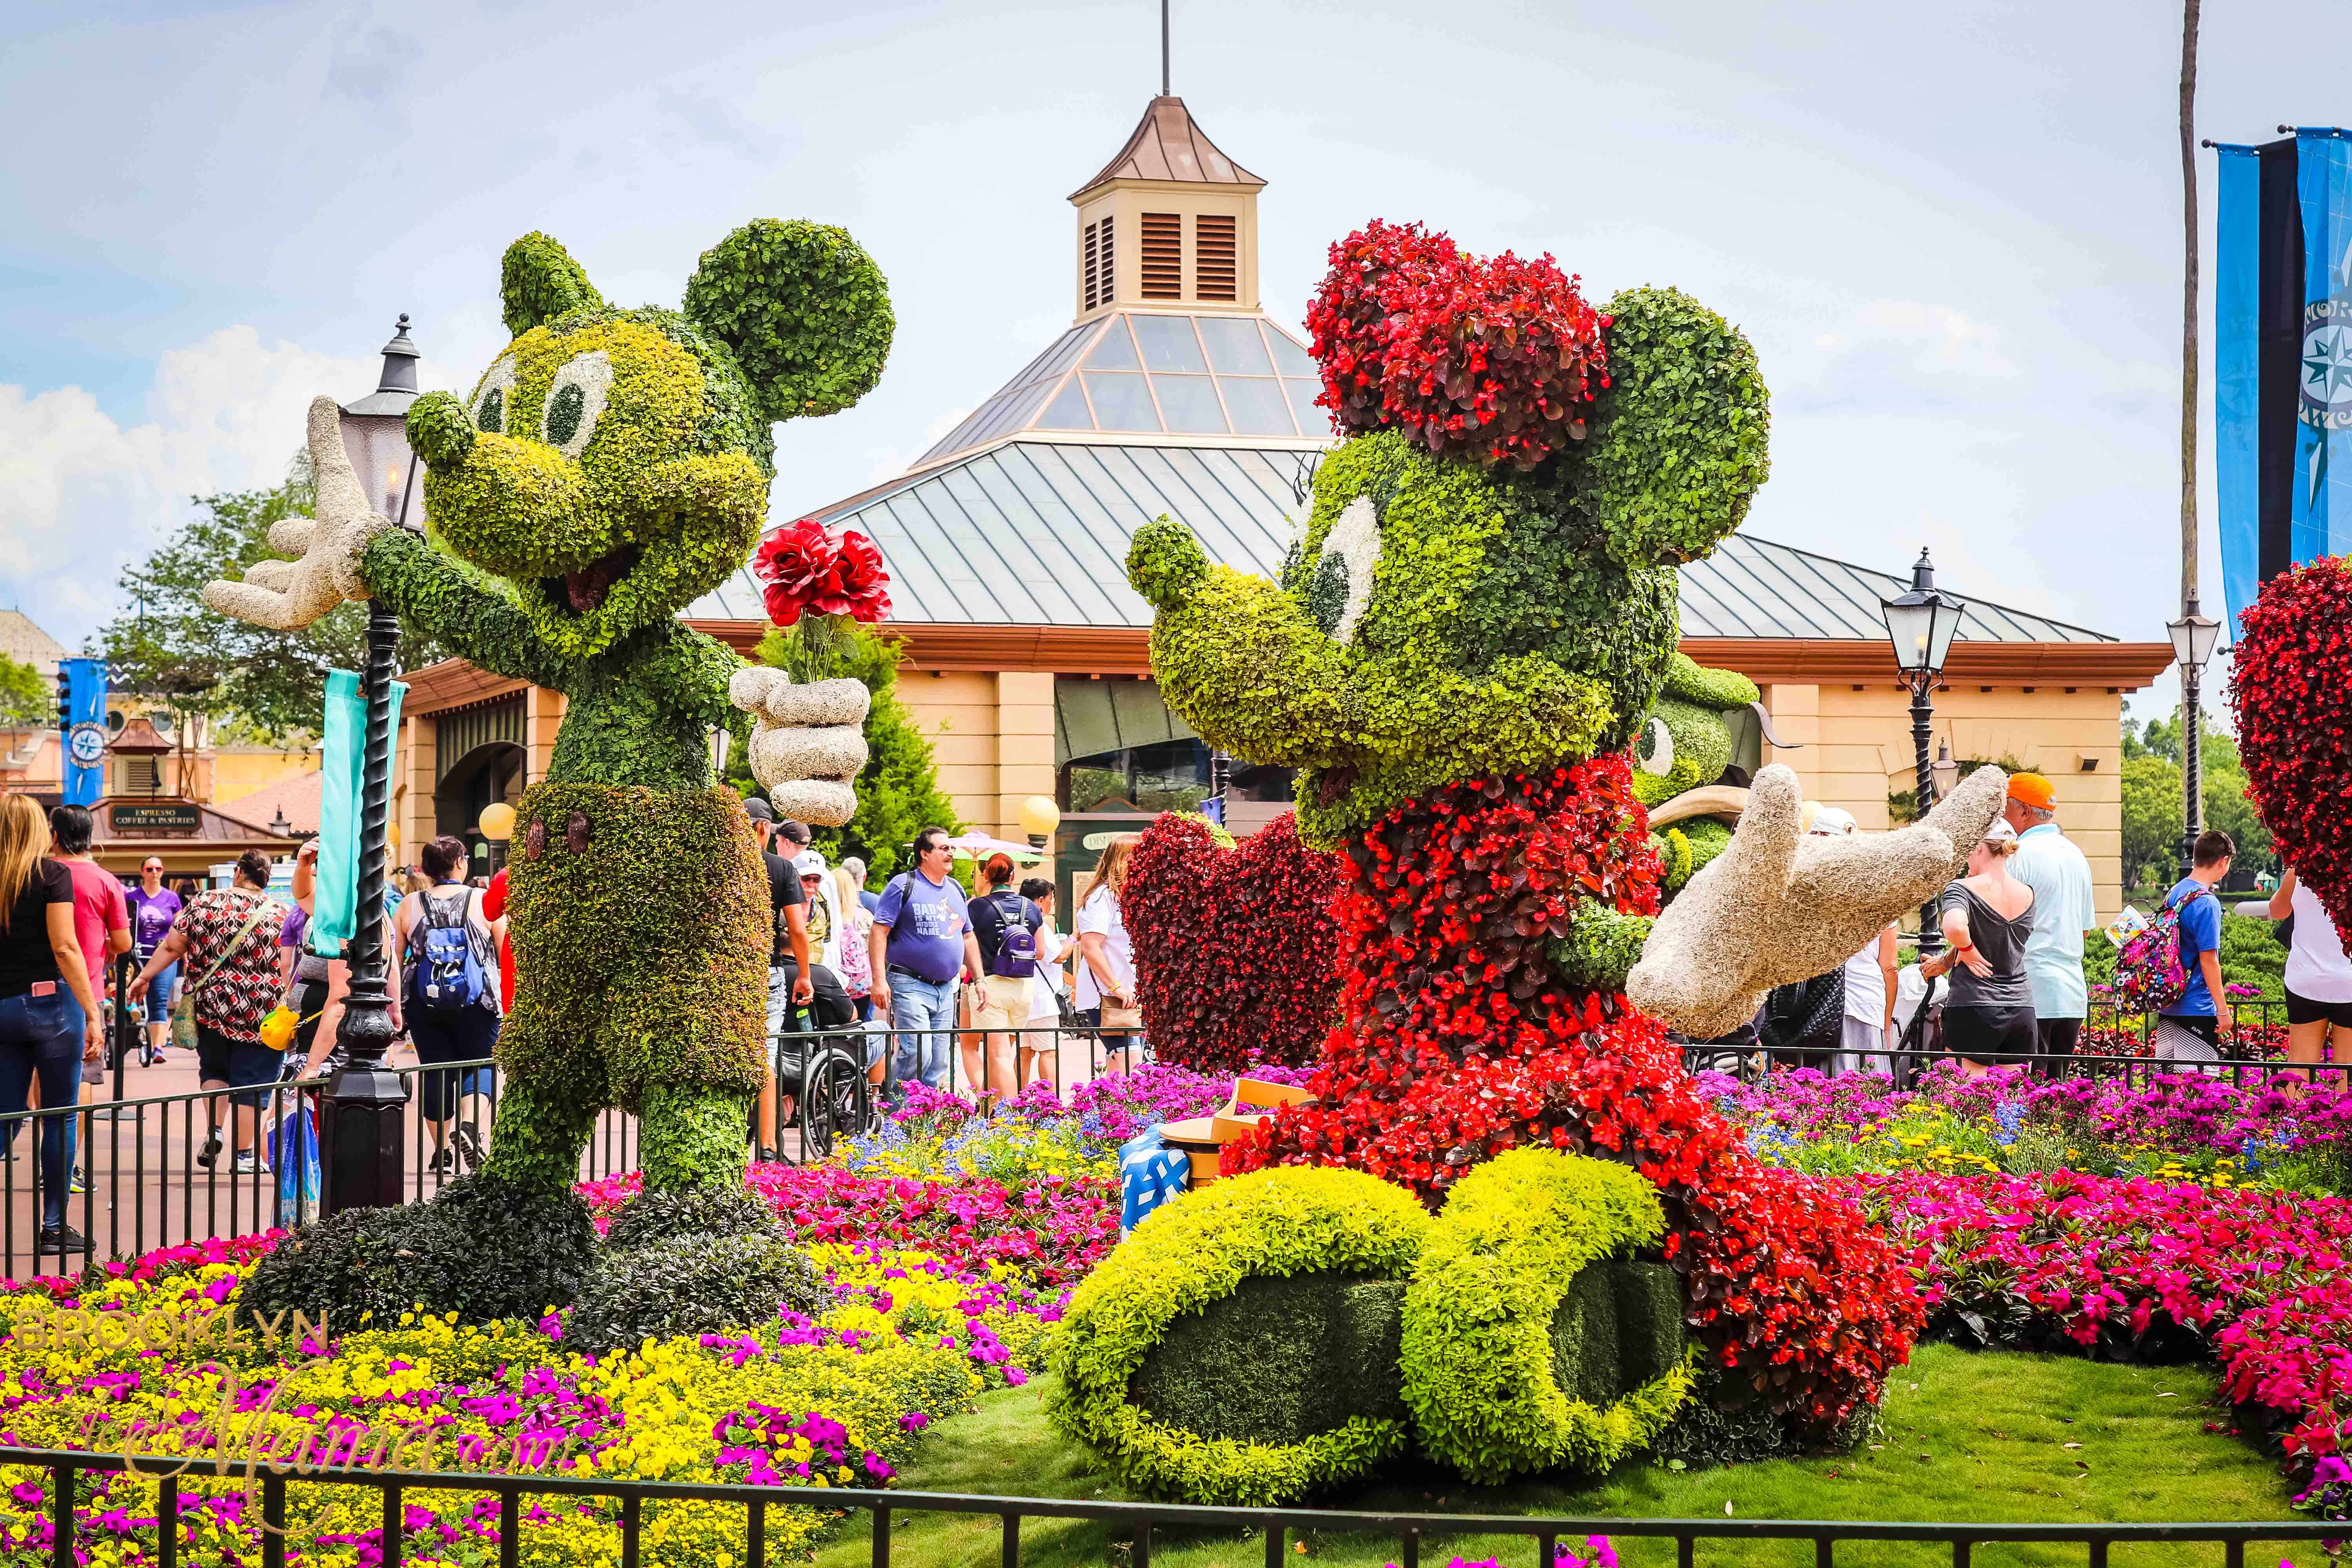 2019 epcot flower and garden festival: must see food and attractions